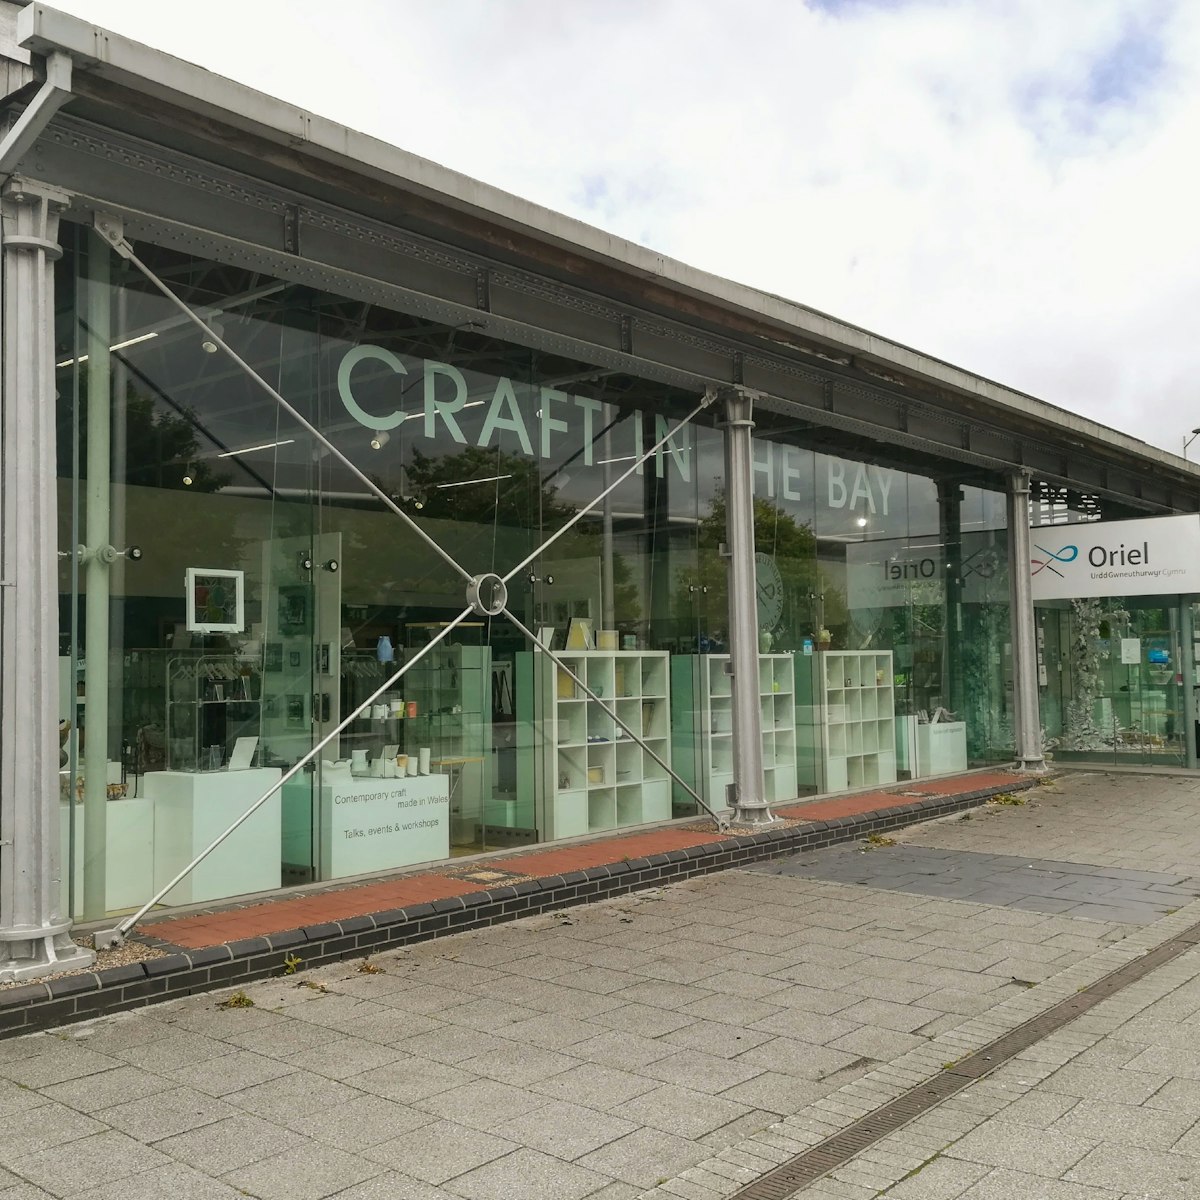 Outside the gallery, Craft in the Bay